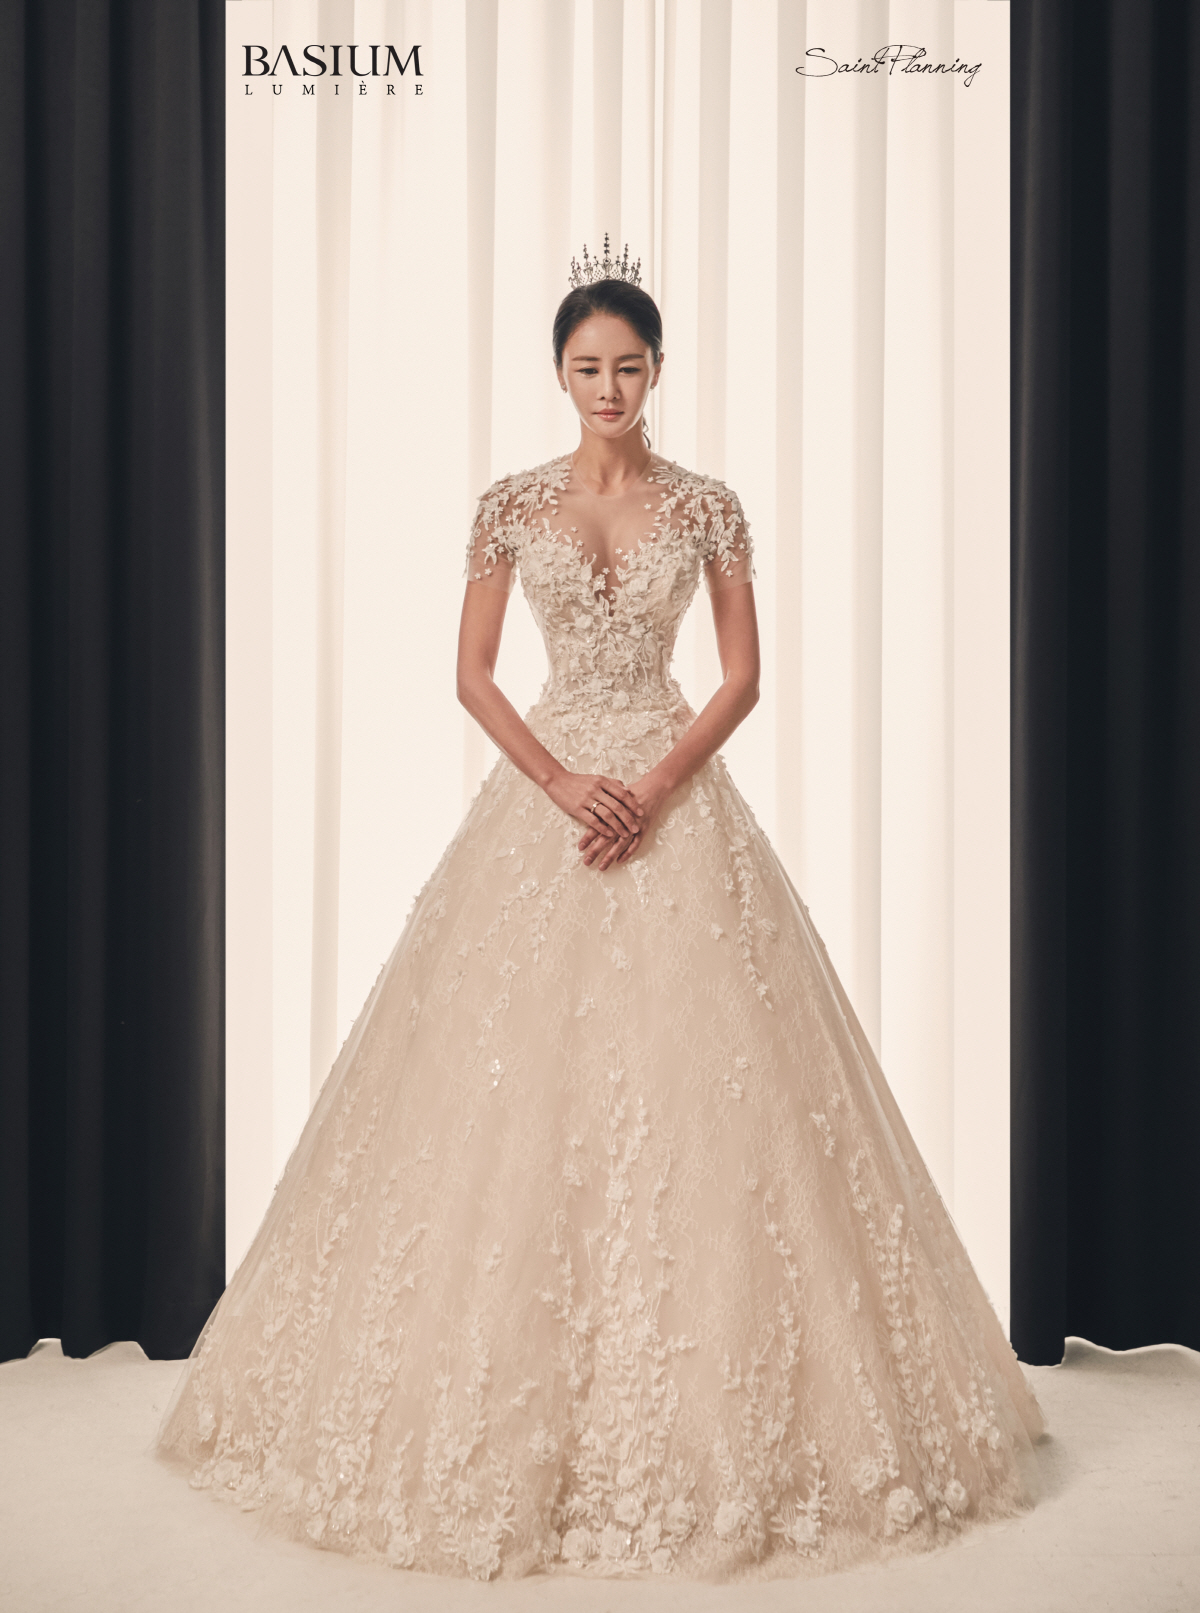 Kim Miyeons wedding picture, which is about to be married in December, was released.Kim Miyeon will be married at the Shilla Hotel in mid-December.The wedding ceremony will be held in a calm and reverent atmosphere with only the families of the two families with the intention of the prospective groom and family.Kim Miyeon in the picture captivated her with her beautiful beauty and thoroughly managed S-line body.The wedding photo, which was recently held privately, was held at the Basium Studio, operated by an acquaintance who had known him for a long time.An official said, I did not leave the laughter in the filming, and every time I was tired of shooting for a long time, I showed each other comforting and saving each other.Especially, every time Kim Miyeons beautiful dress came in, all the steps were impressed.